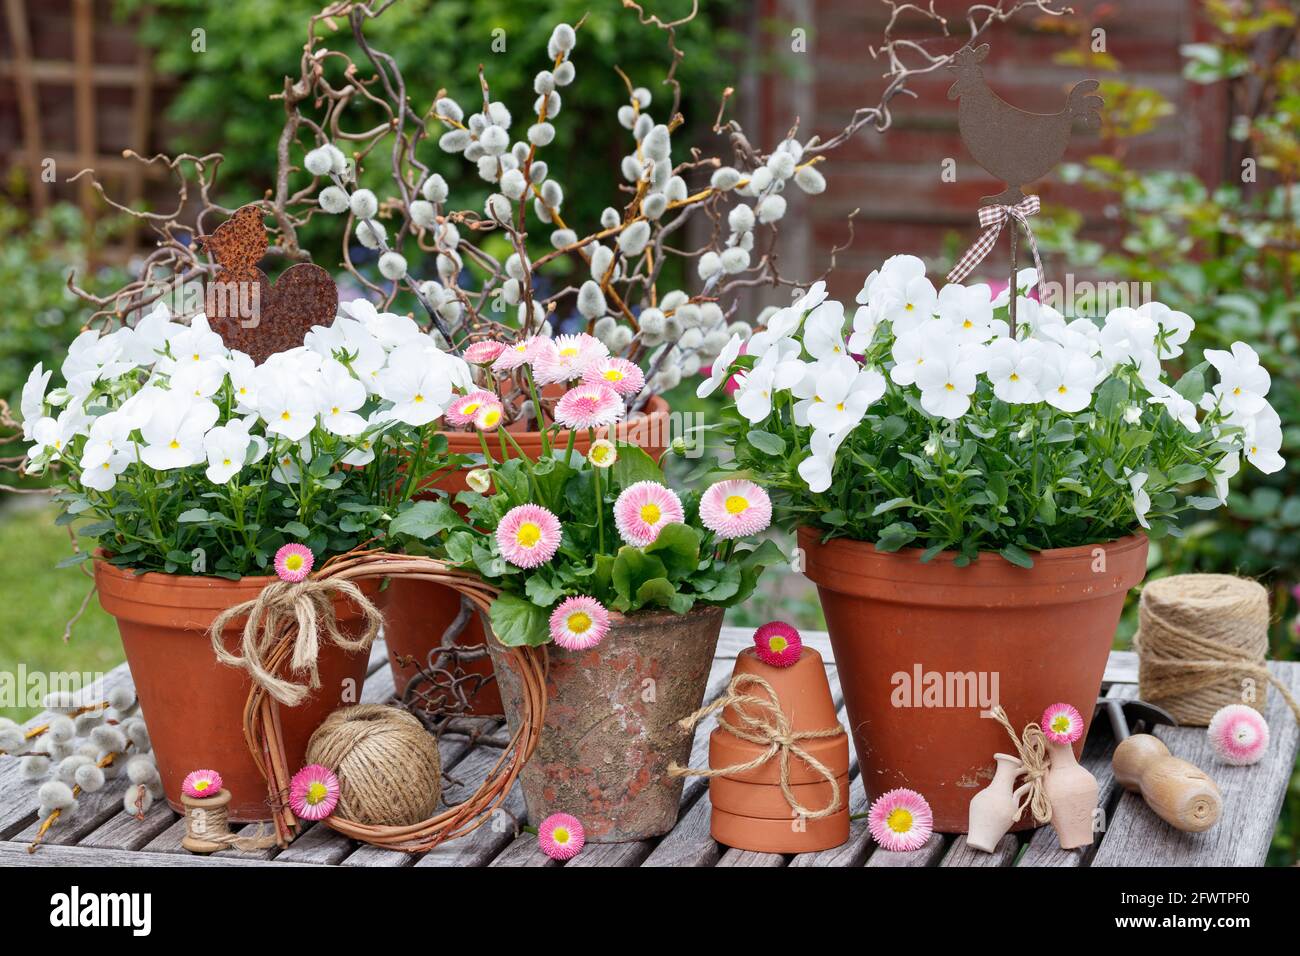 rustic garden decoration with bellis perennis and viola flowers in terracotta pots Stock Photo